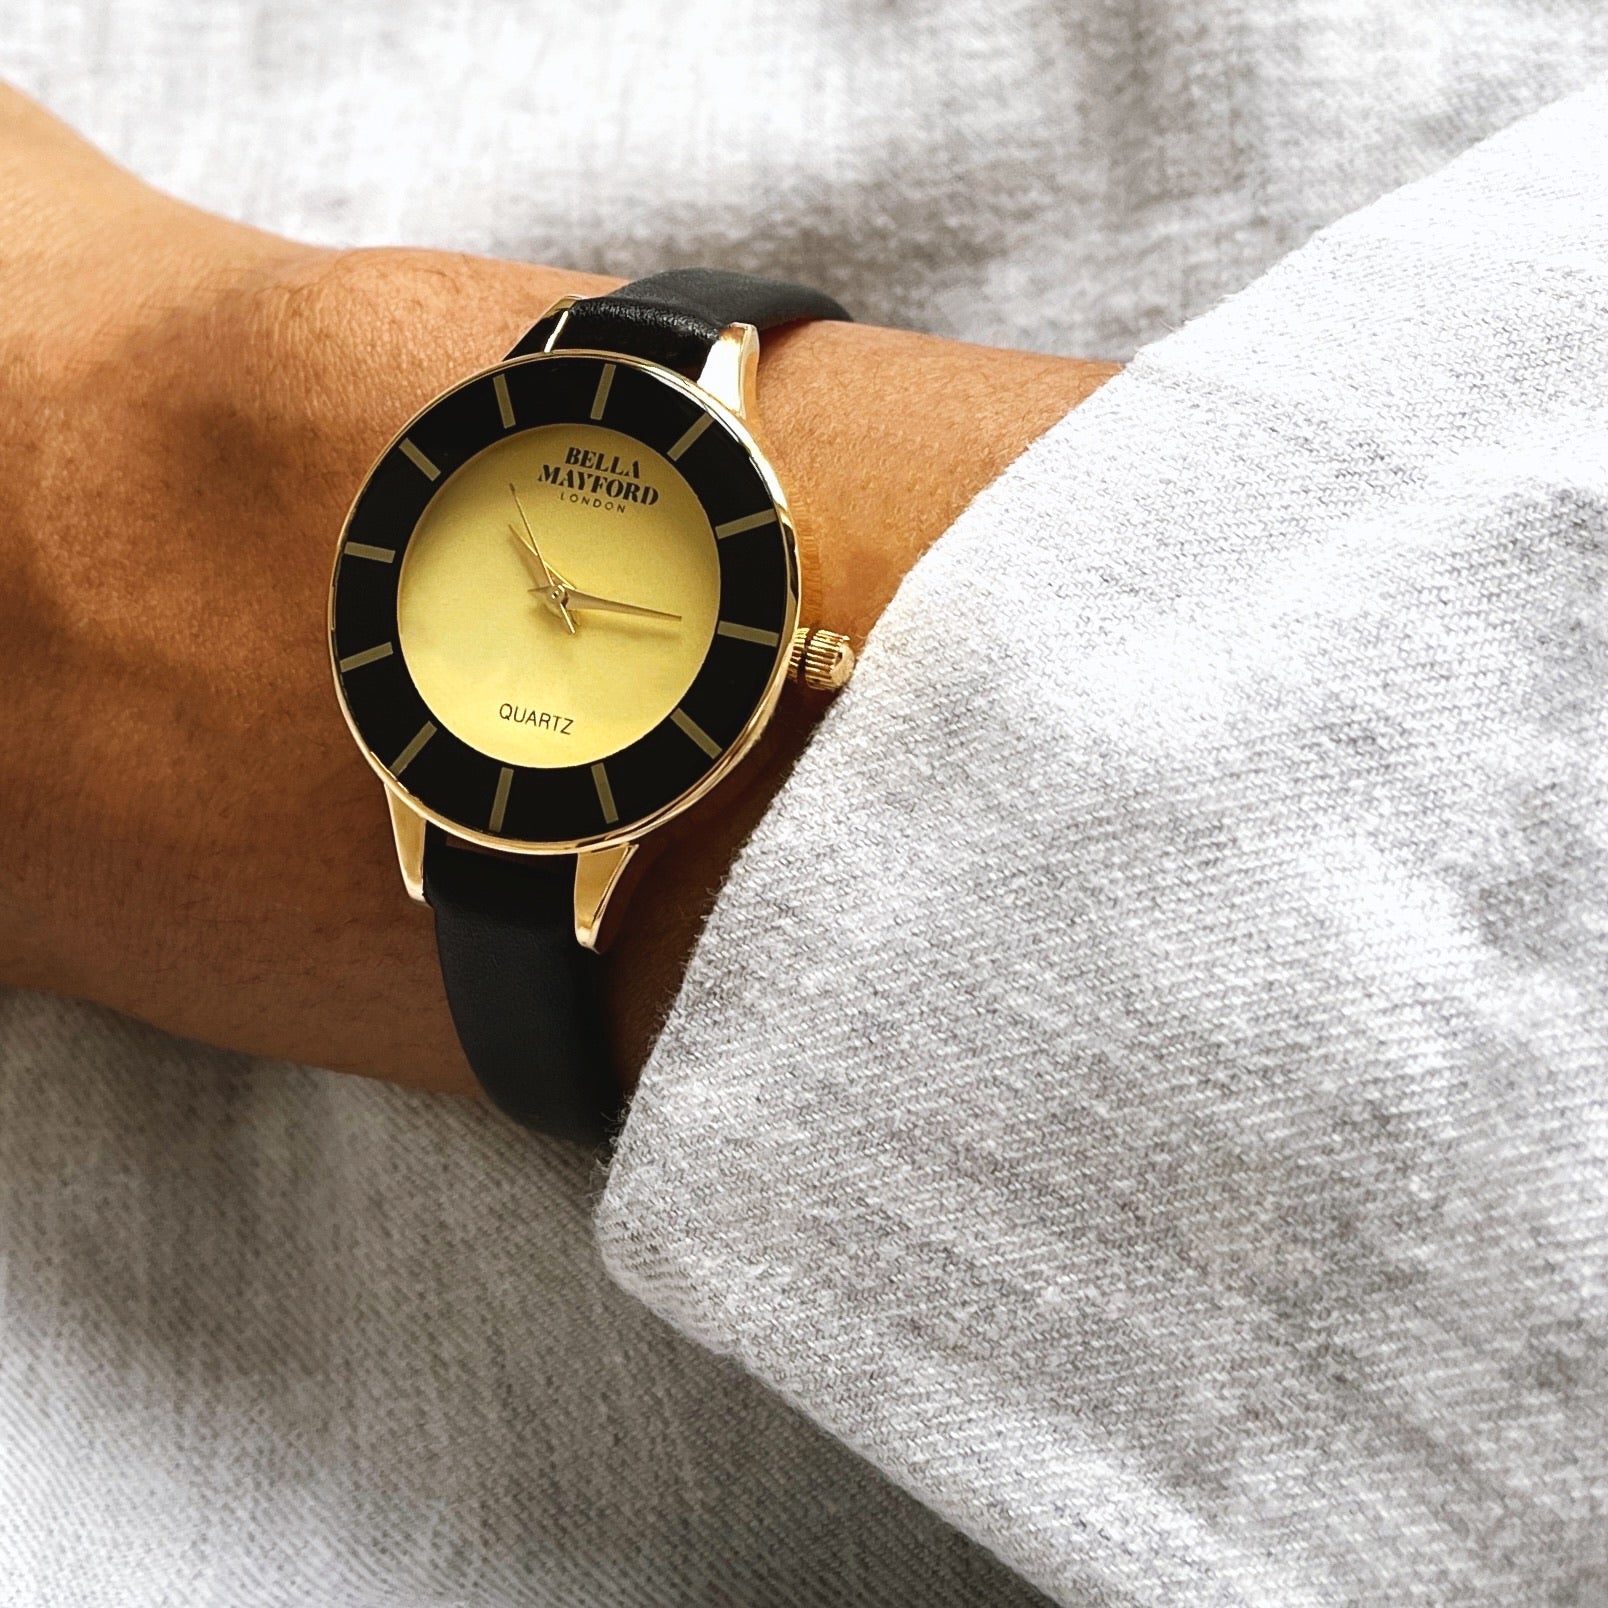 Bold Spirit. Gold And Black Dial, Yellow Face, Black Strap